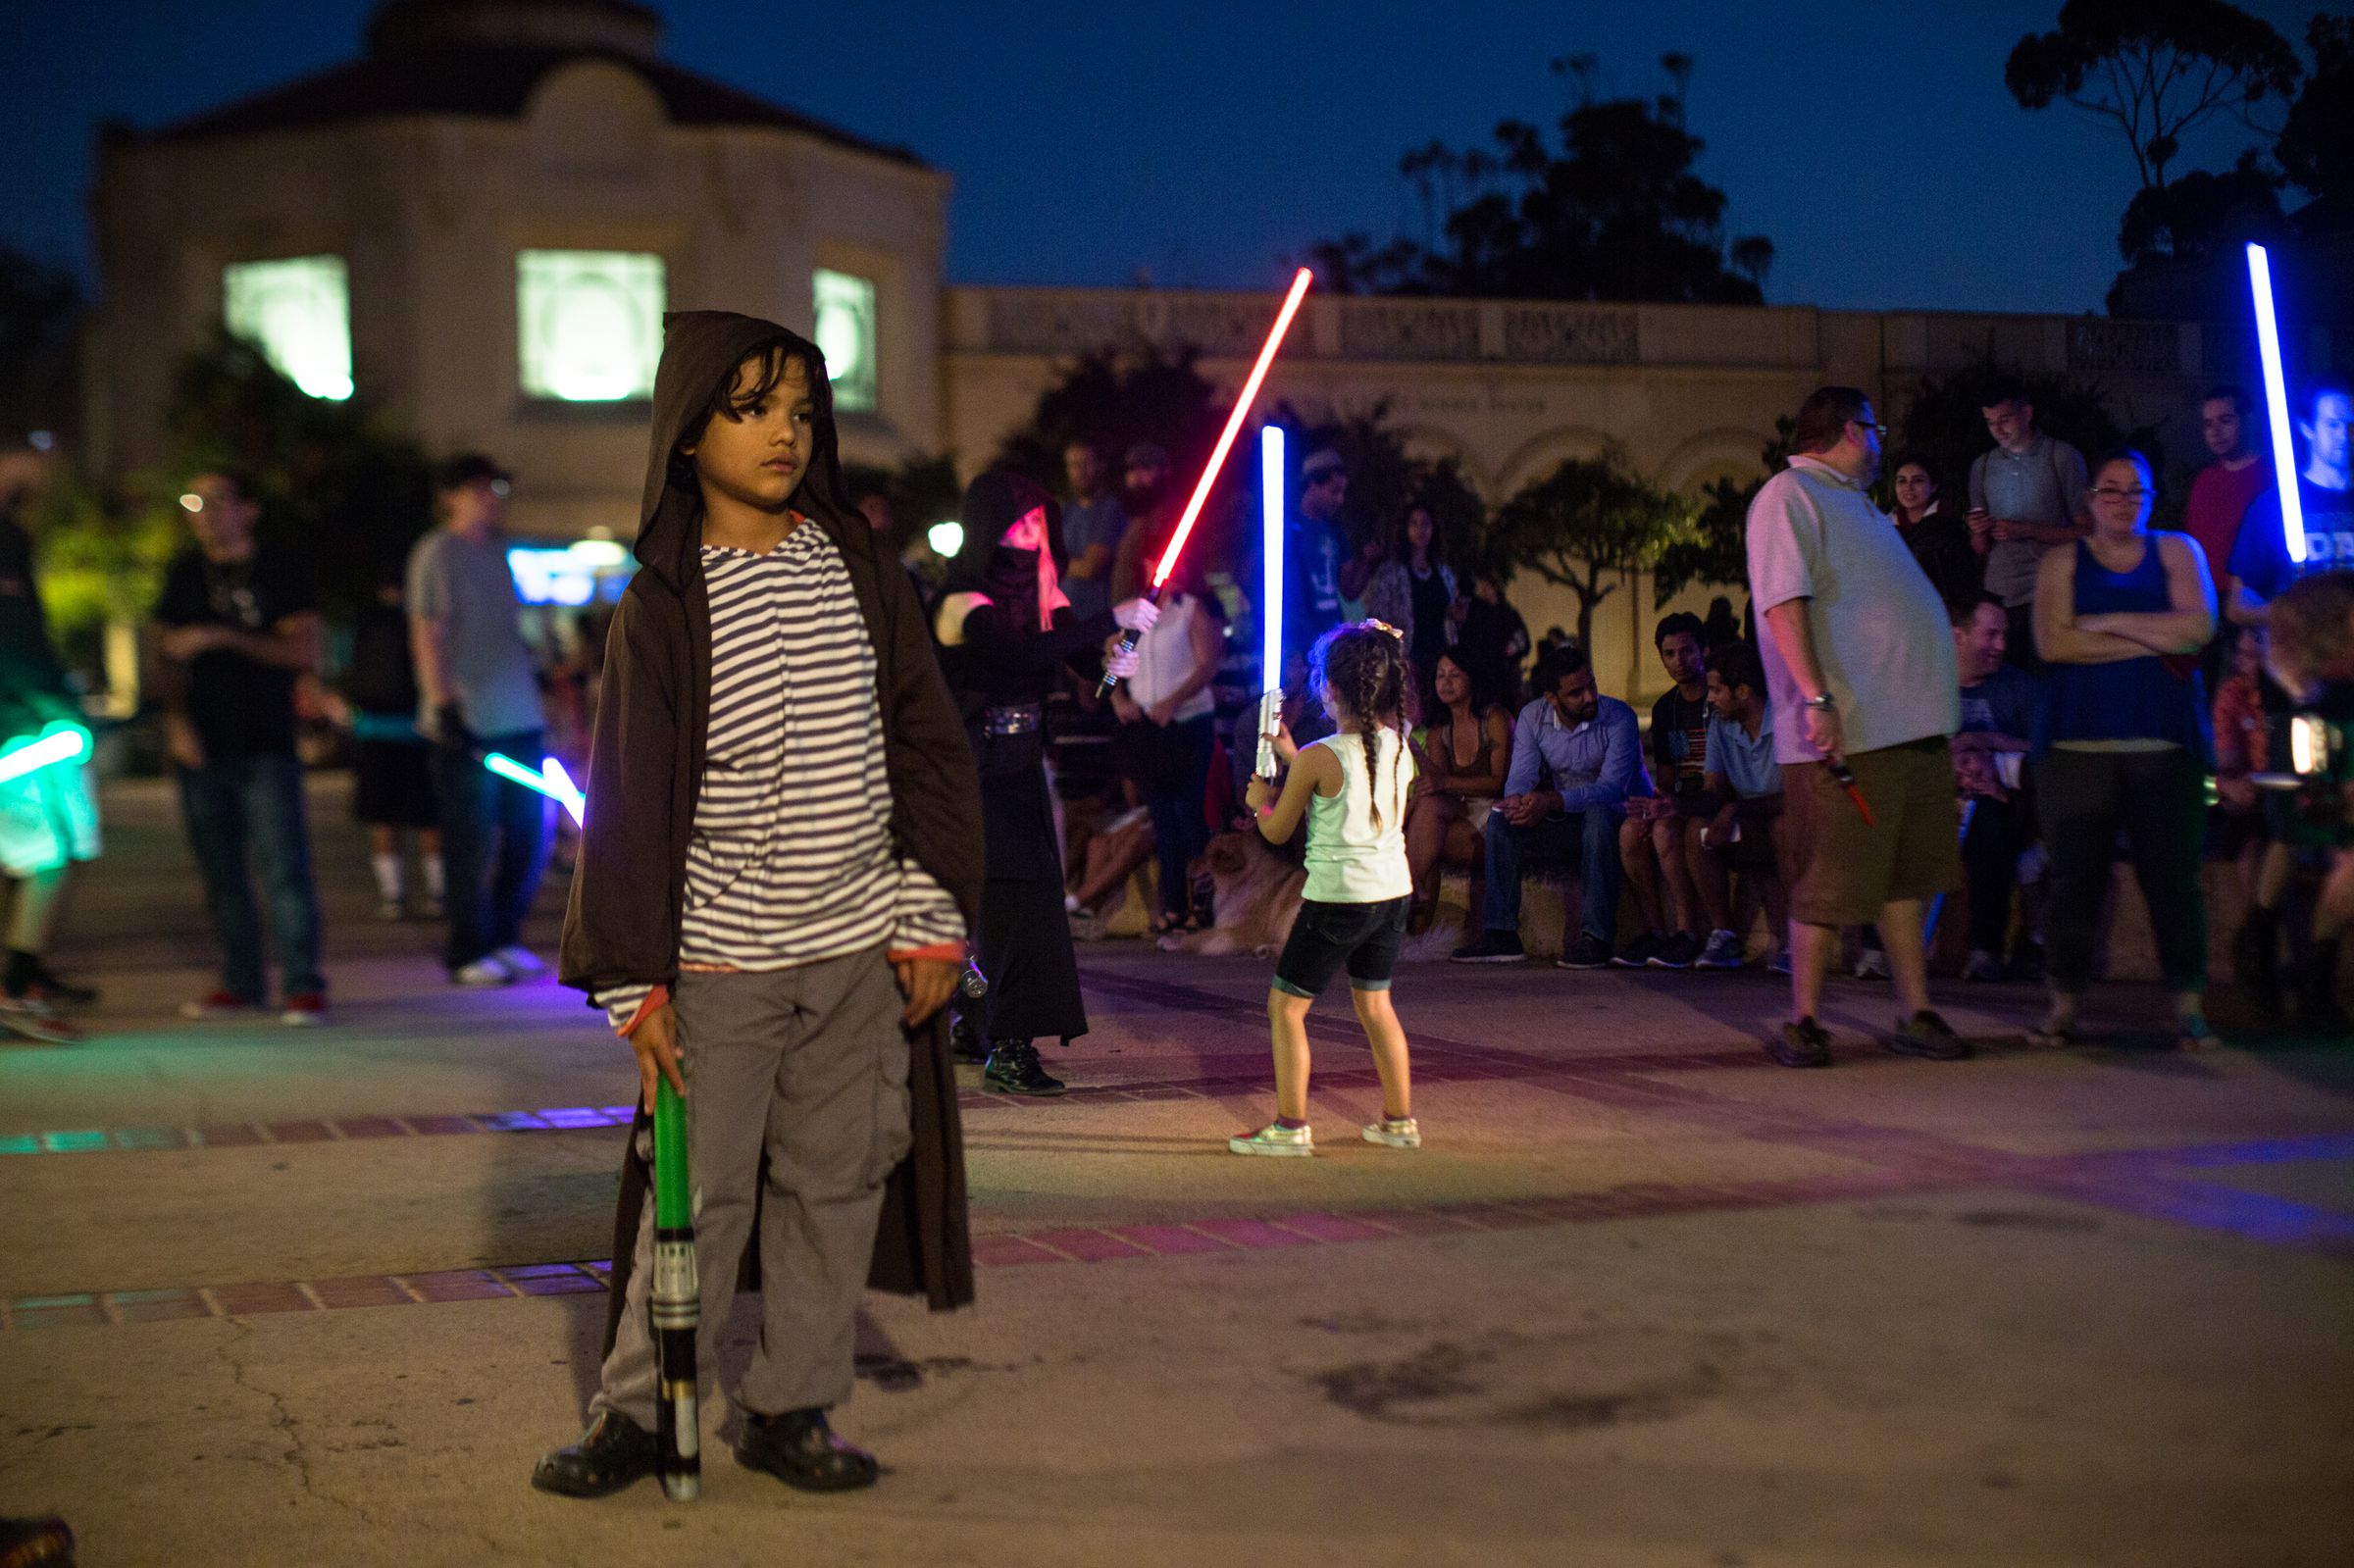 Underground Lightsaber Fighters battle during Comic-Con 2016